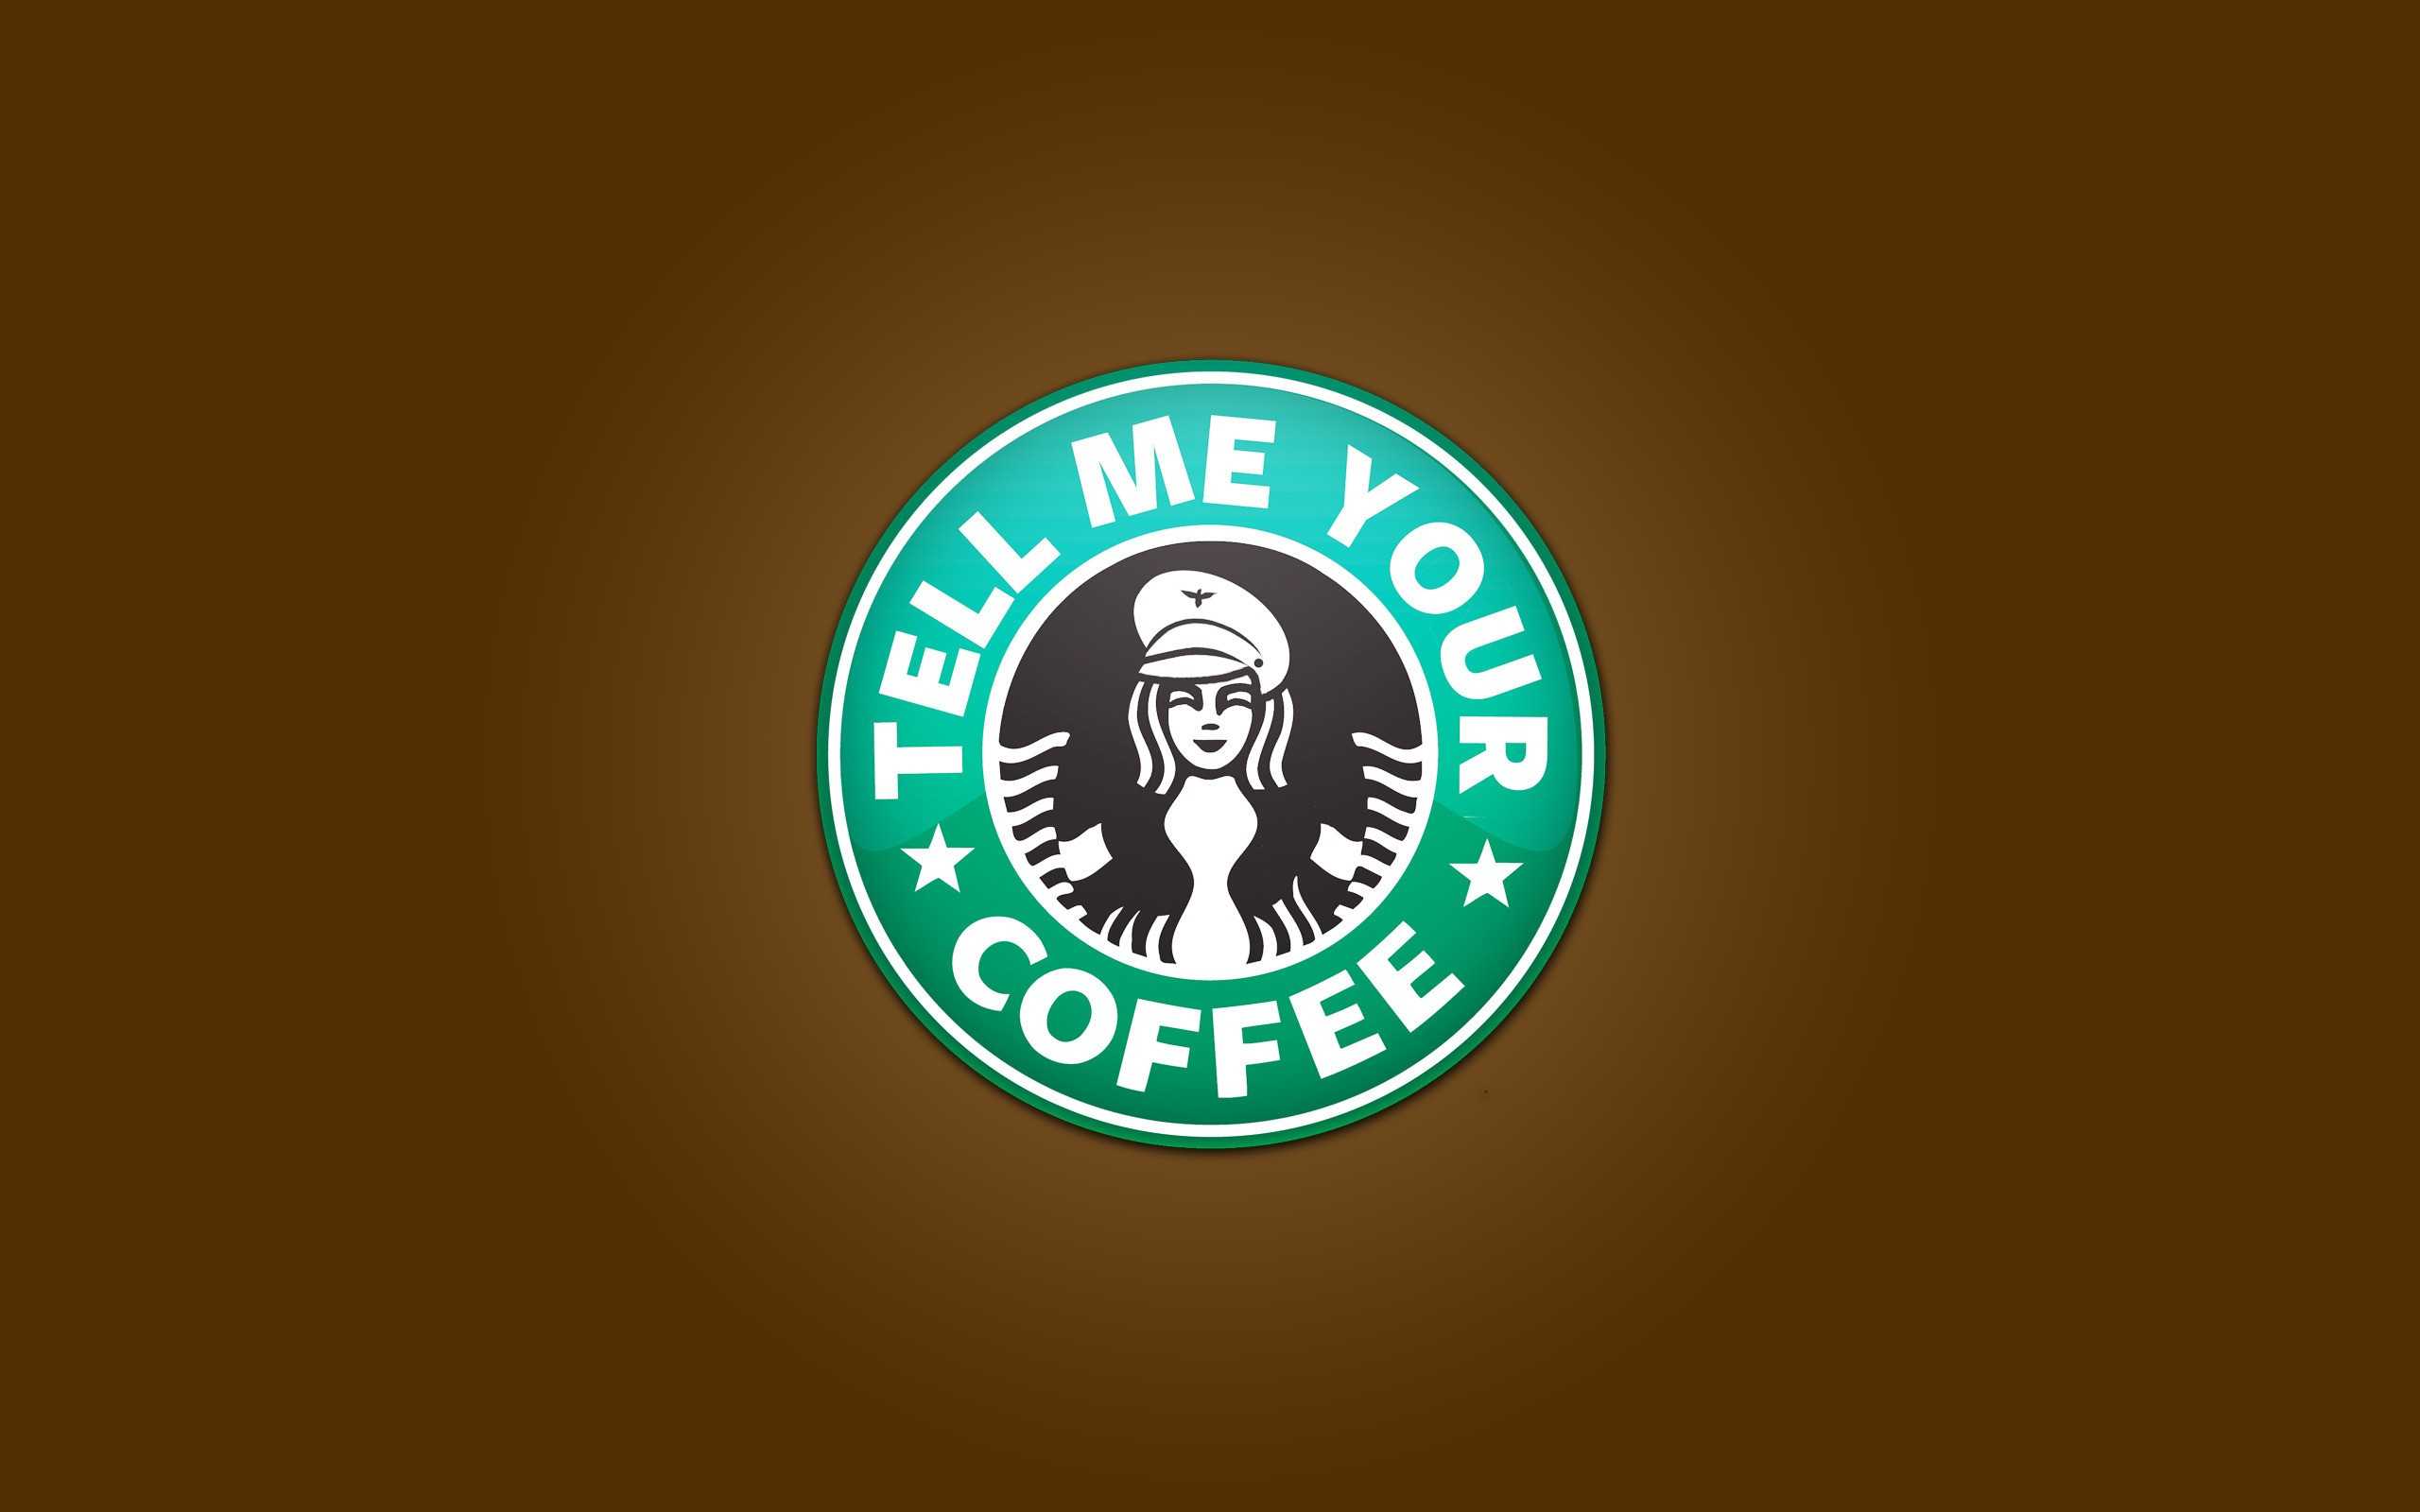 Starbucks Graphic Backgrounds For Powerpoint Templates – Ppt In Starbucks Powerpoint Template